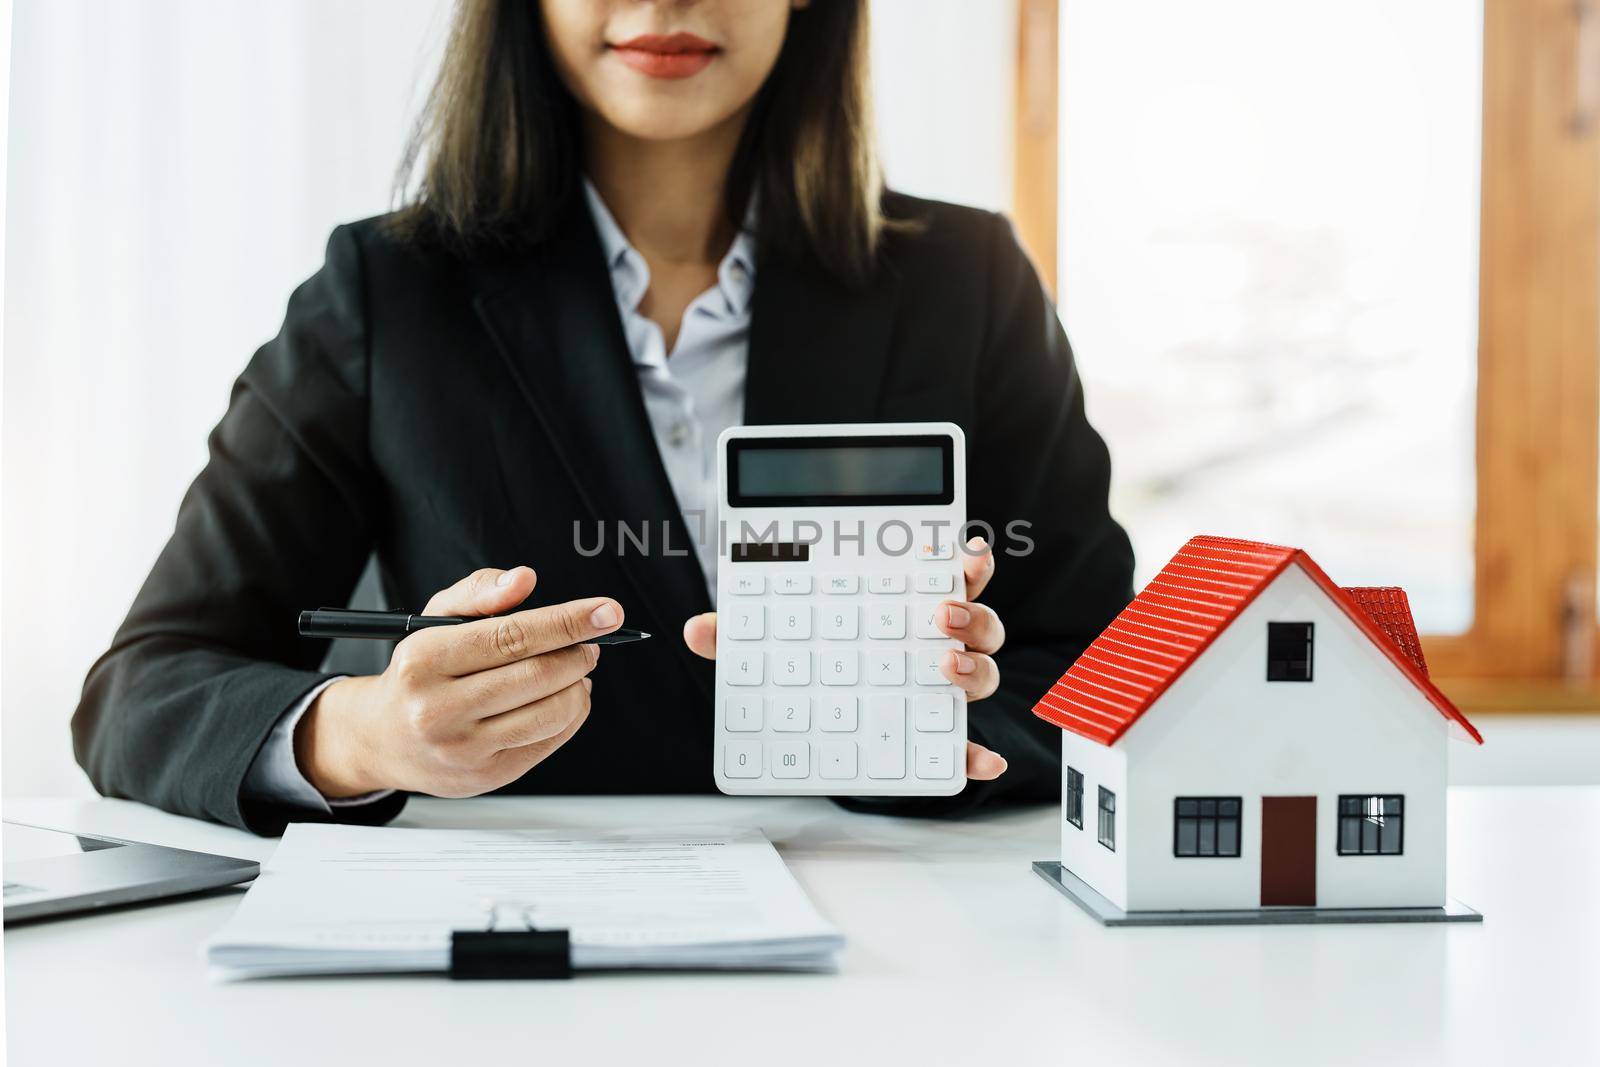 Entrepreneurs, business owners, accountants, real estate agents, A young woman uses a calculator to calculate her home budget to assess the risks of investing in real estate. by Manastrong